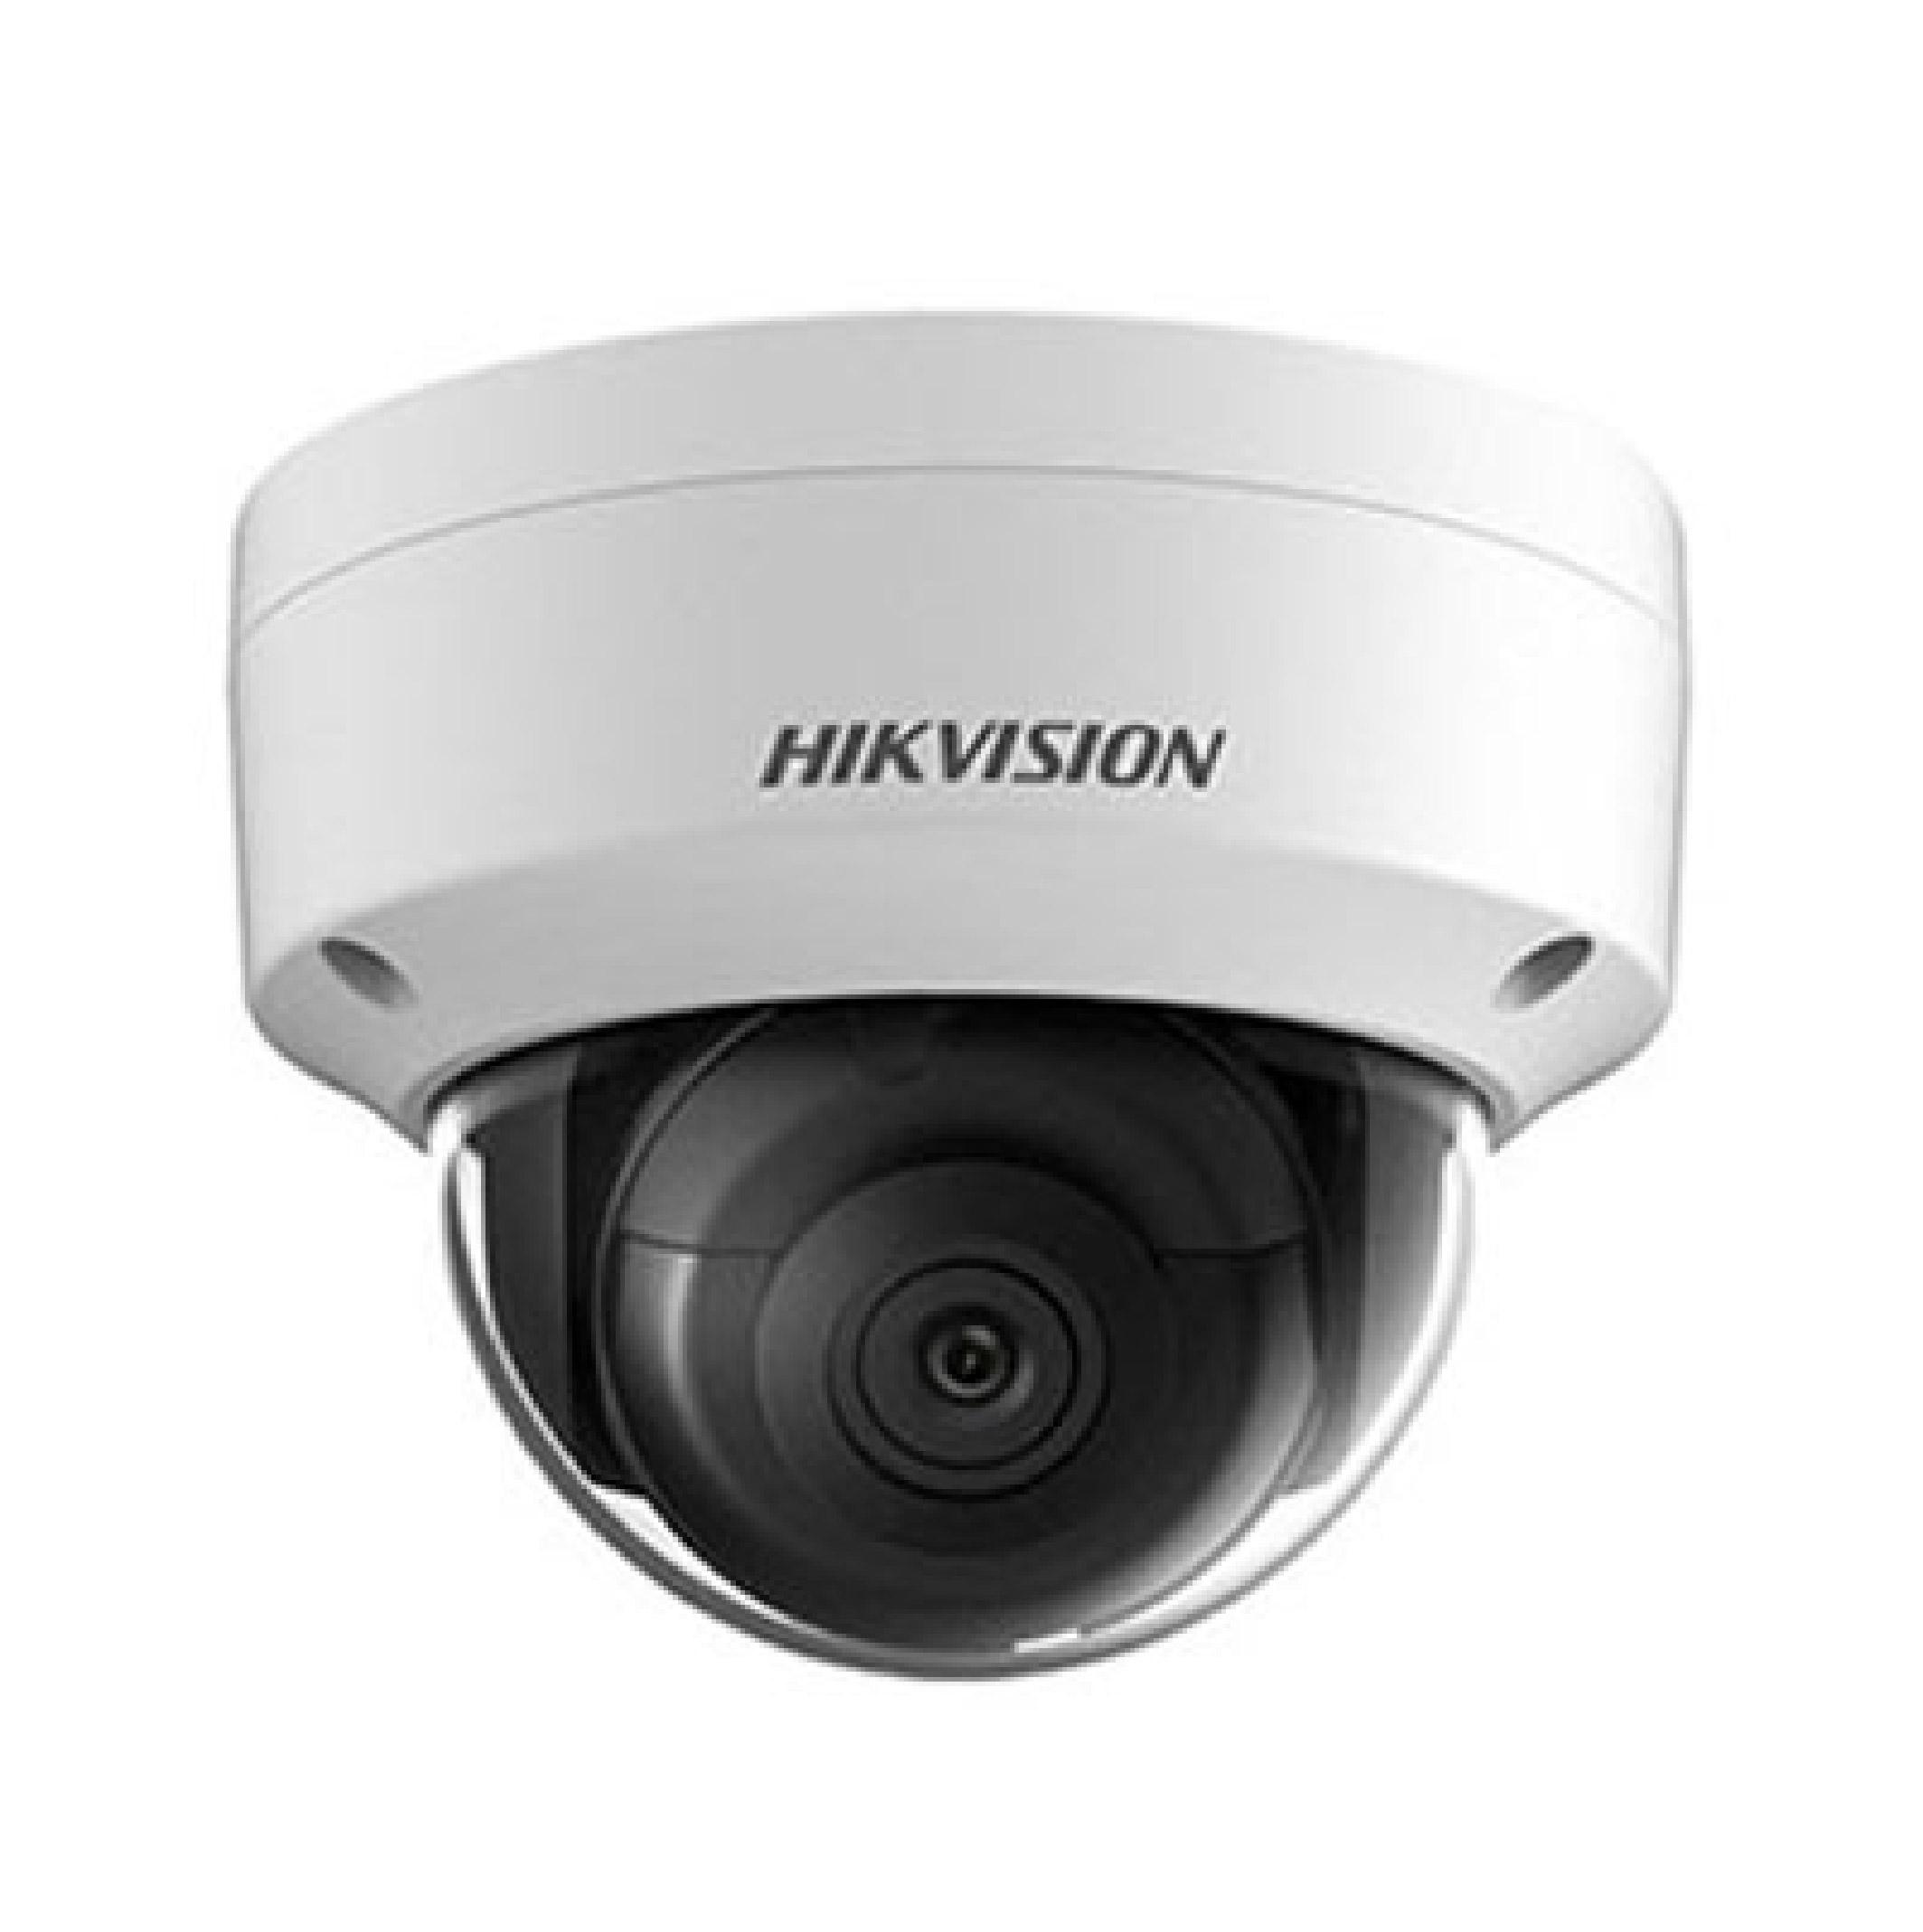 HIKVISION DS-2CD2155FWD-I(S) Turbo HD Camera